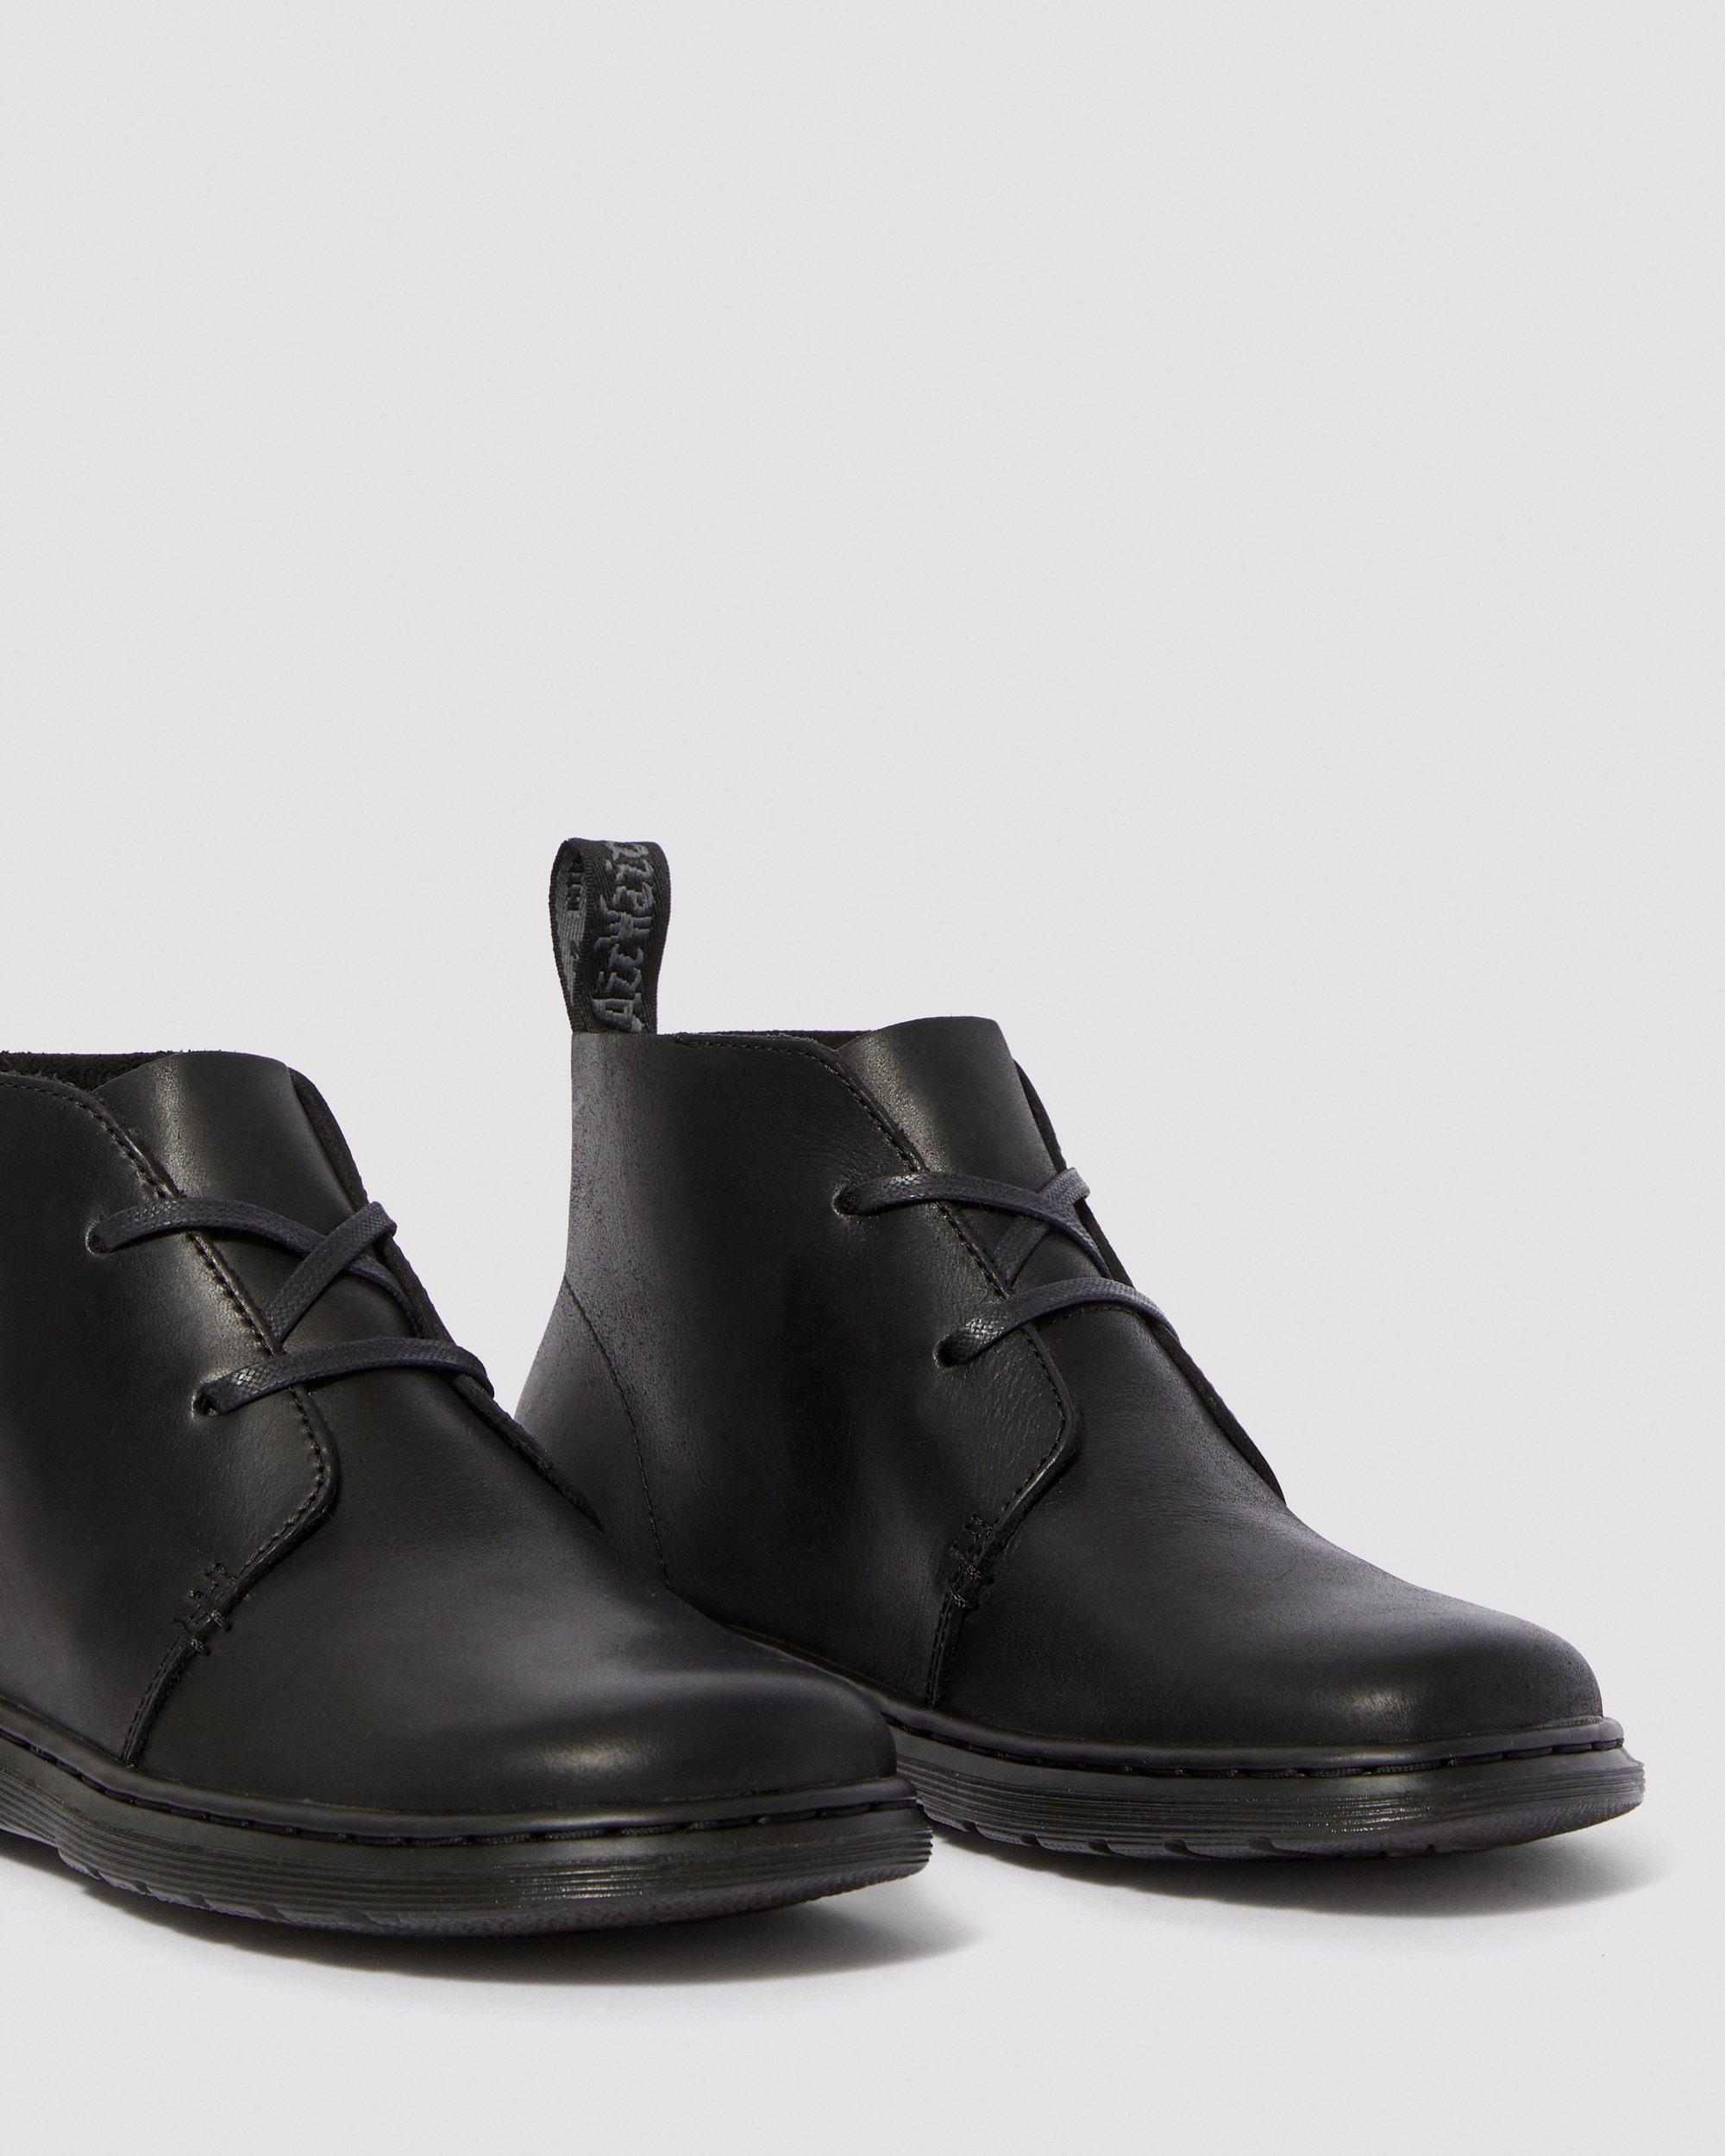 CYNTHIA LEATHER CHUKKA BOOTS | Dr. Martens